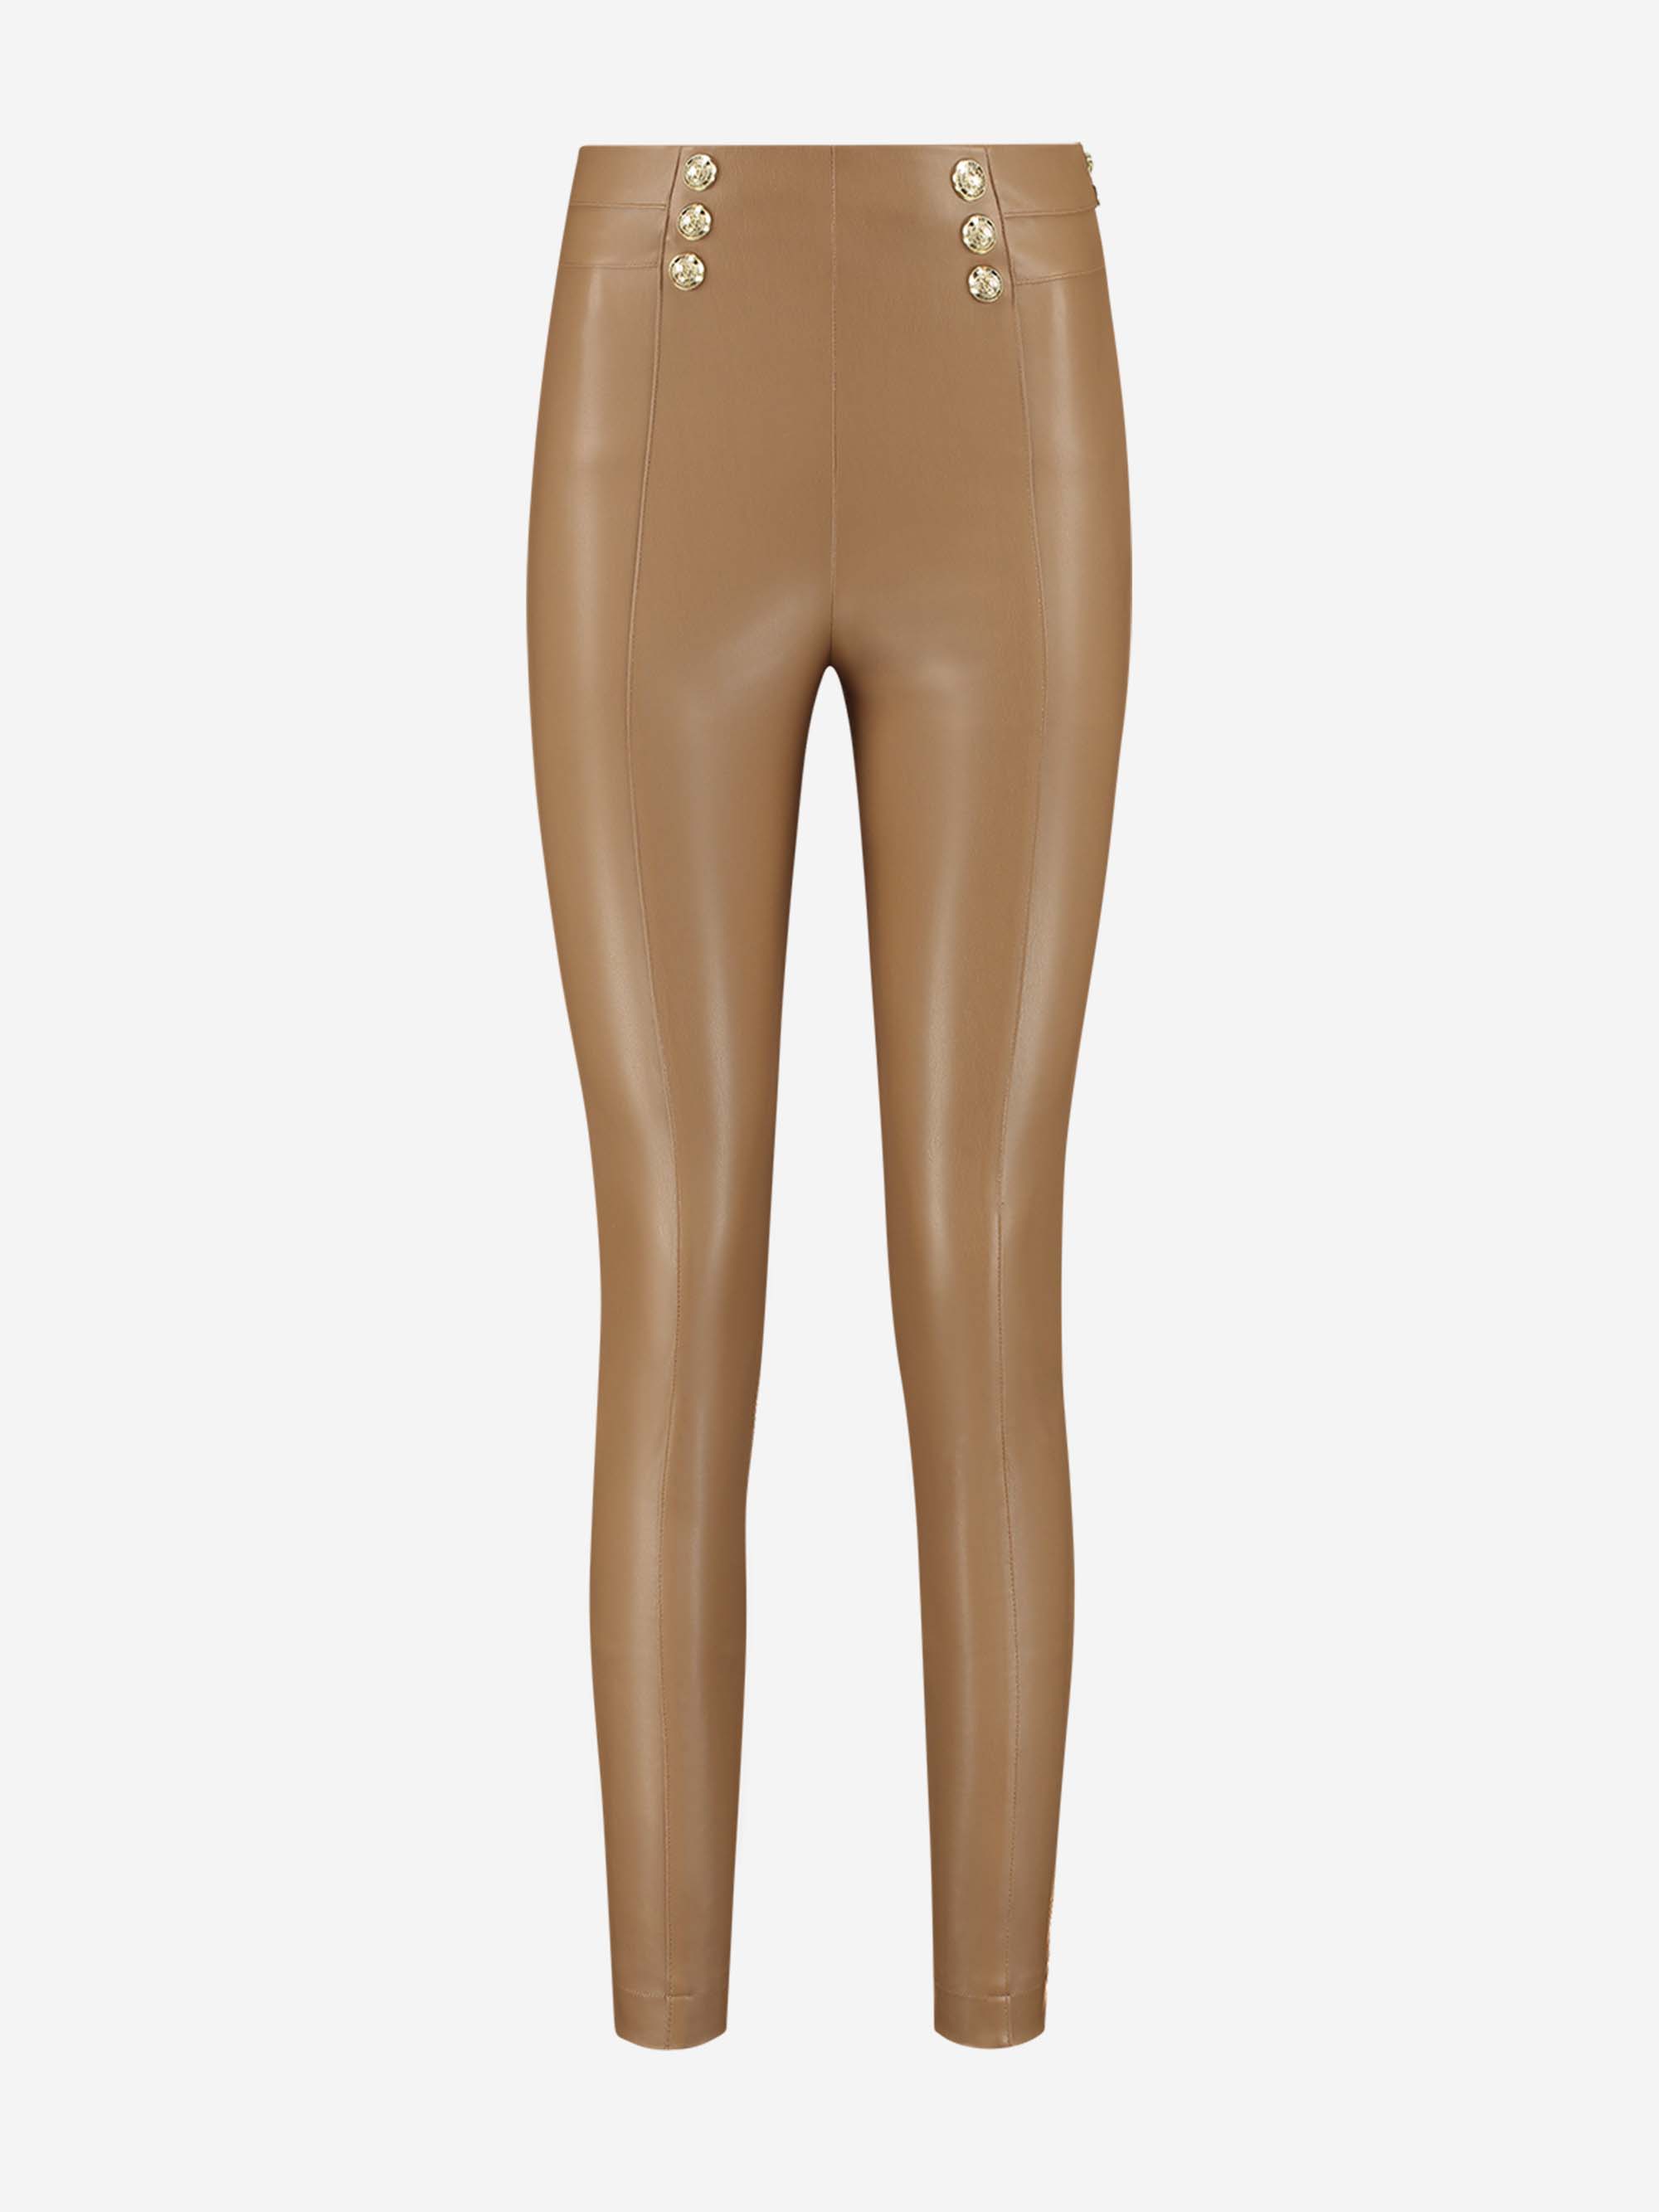 Vegan leather skinny pants with high rise